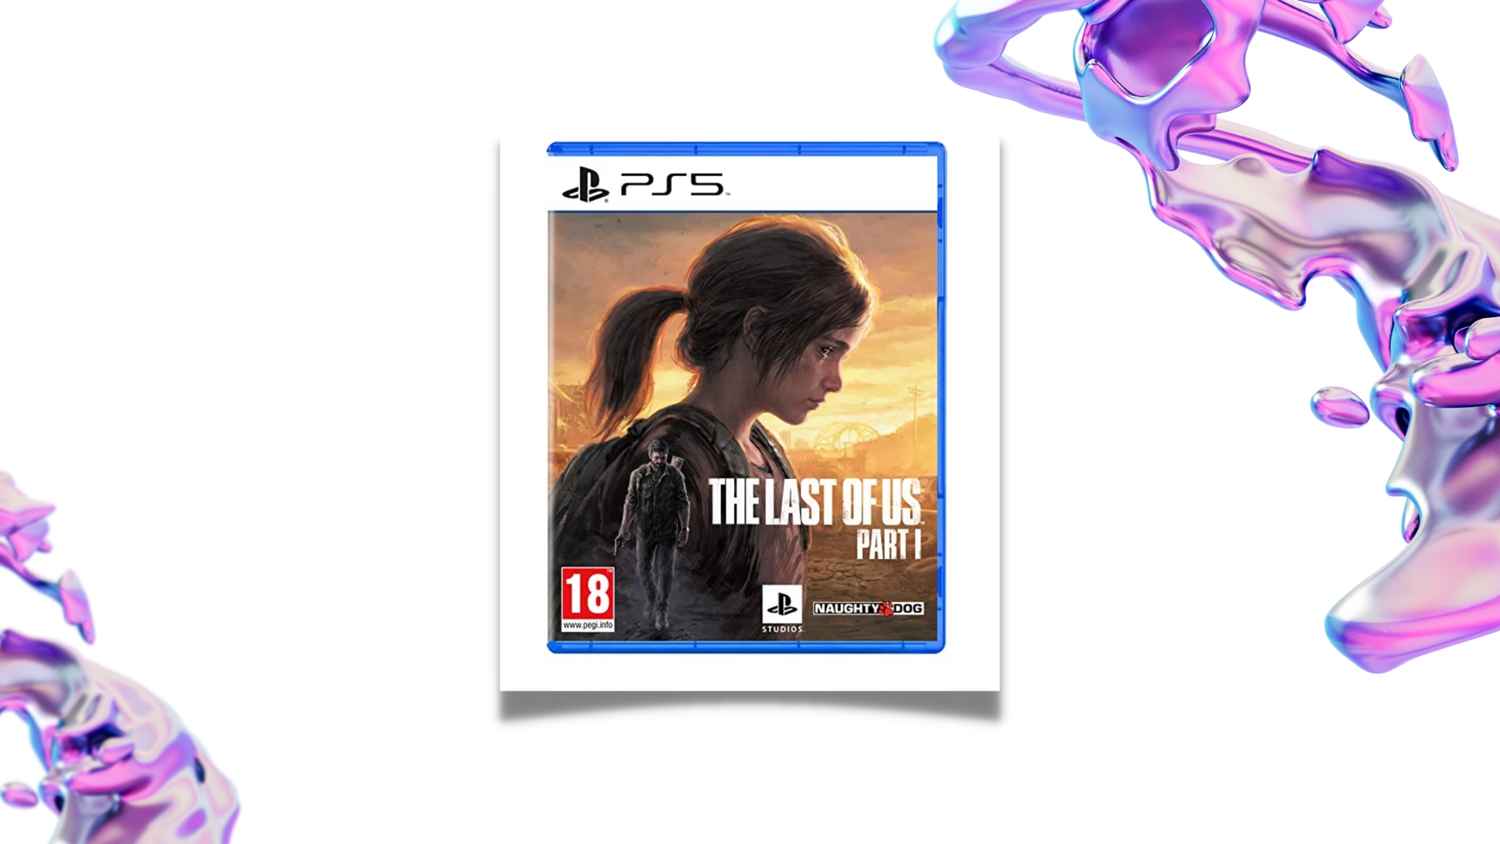 The Last Of Us: Part 1 is available on Amazon with a 32% discount and bank offers